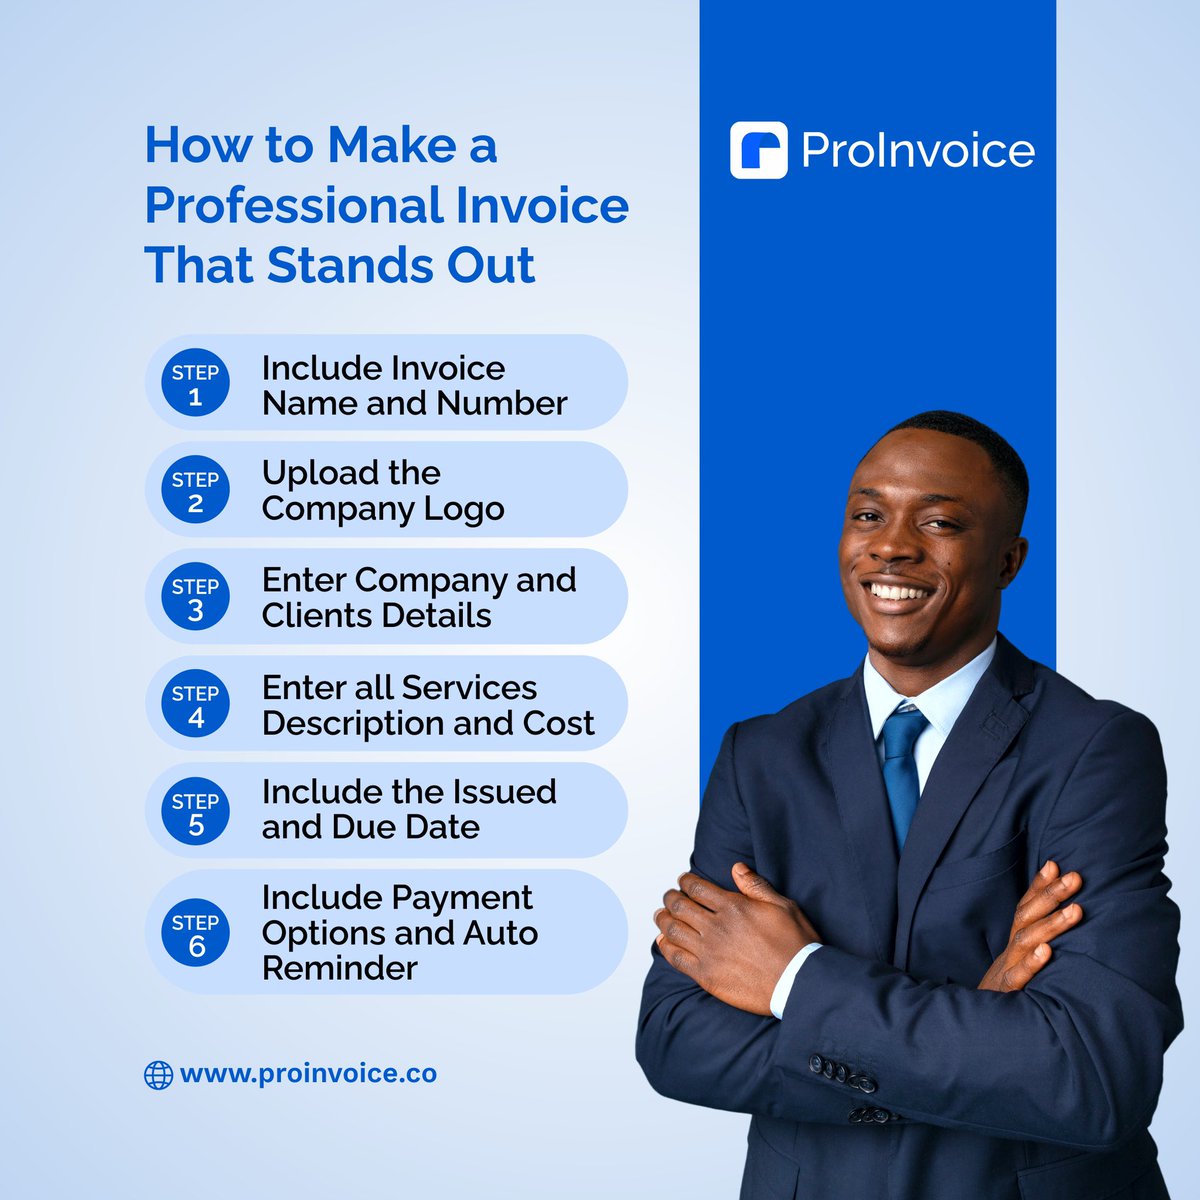 How to Make a Professional Invoice That Stands Out!!

#InvoiceLikeAPro
#ProInvoiceBenefits
#proinvoice
#growwithproinvoice
#businessfact
#businesssupport
#supportsmallbusiness
#businessowners
#businesstips
#businessgoals 
#businesstips
#InvoiceManagement
#SmallBusiness